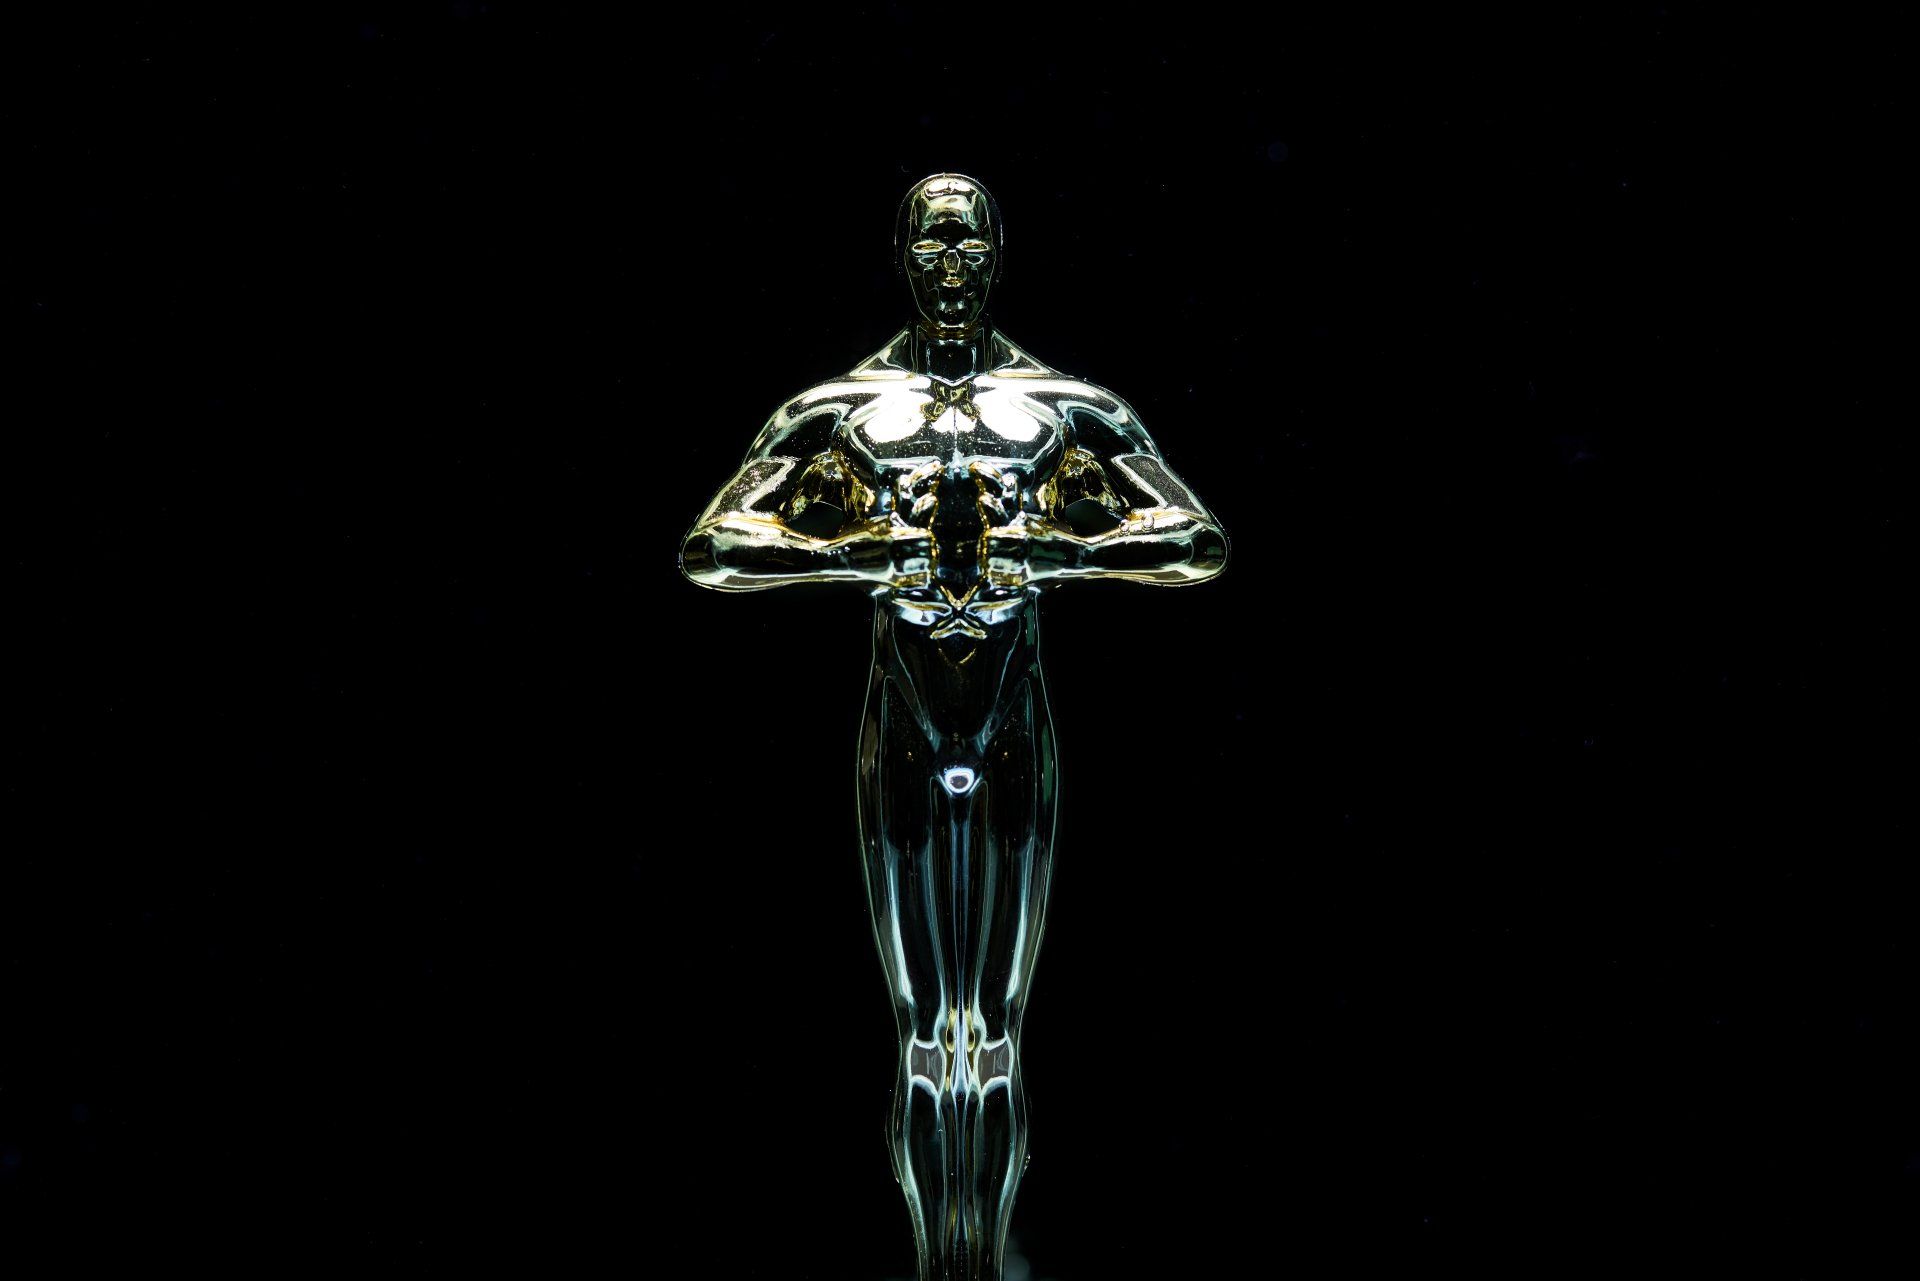 a close-up of an Oscar statue on a black background